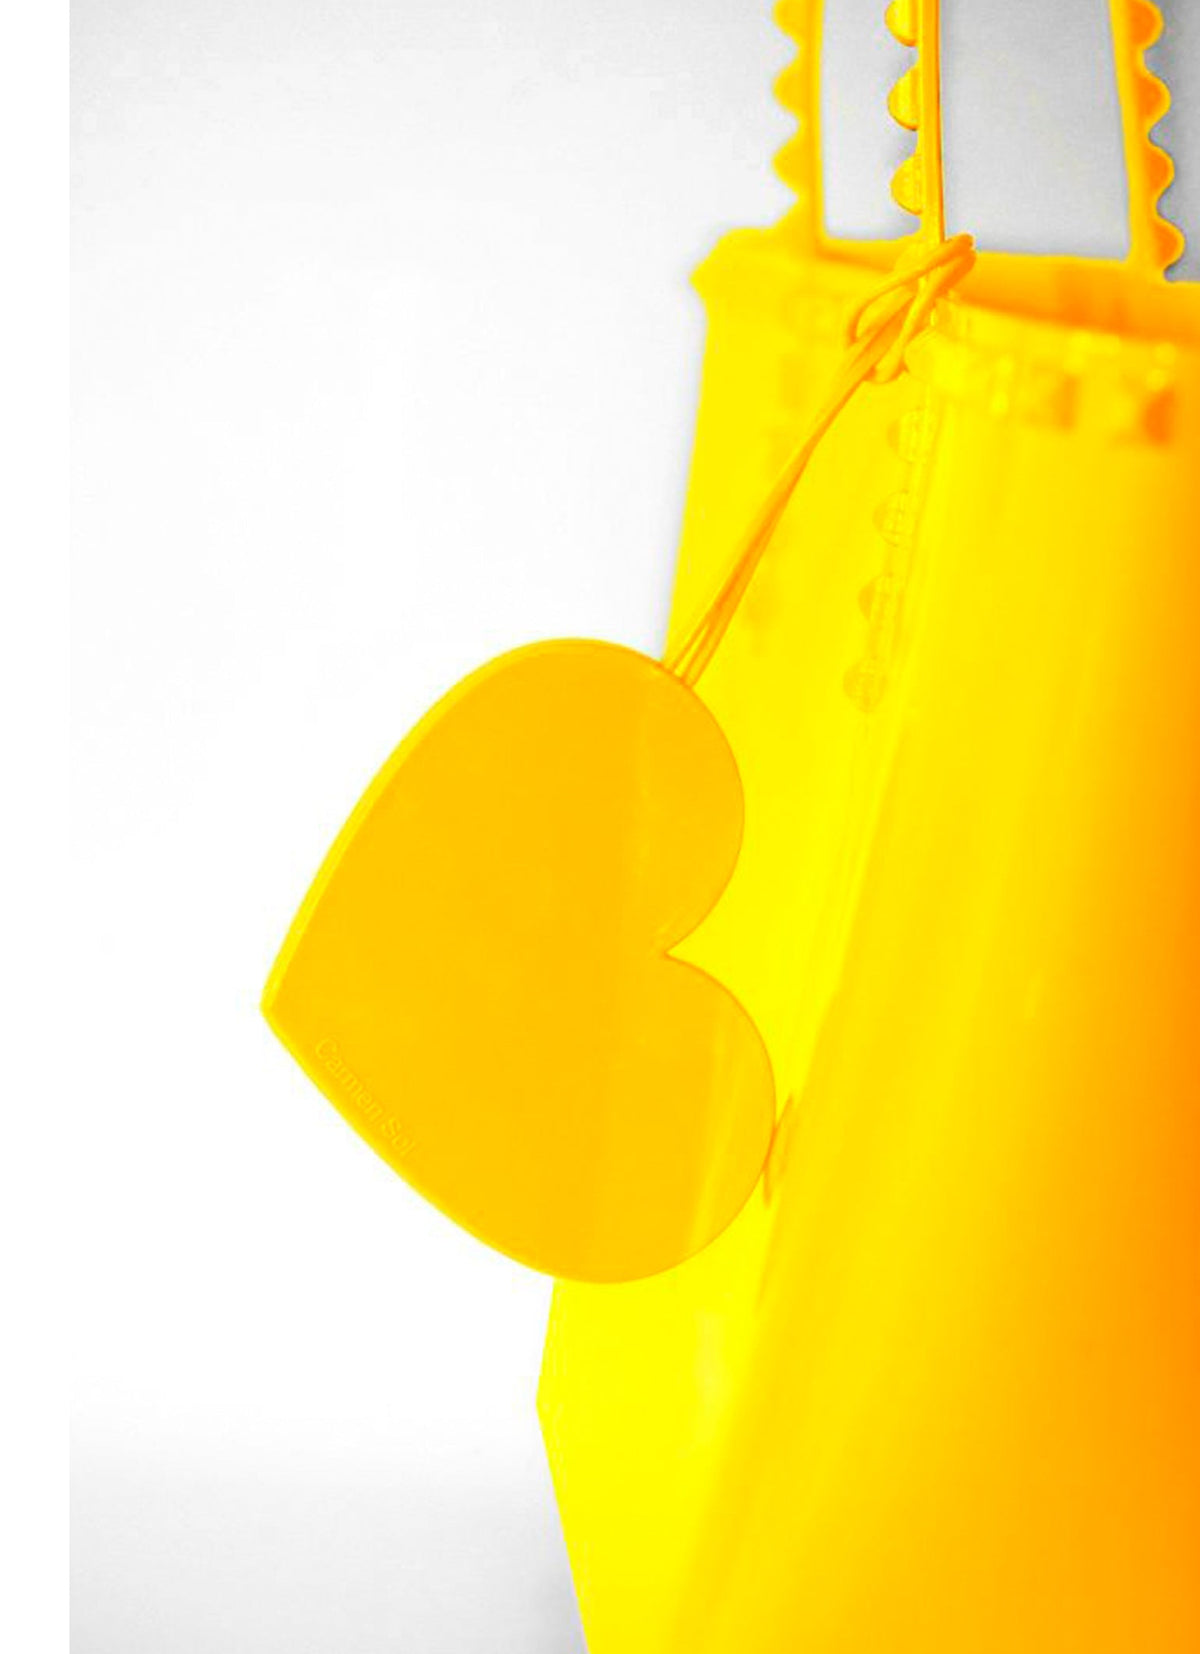 Cuore cute jelly charm purses perfect for Carmen Sol jelly bags in color yellow